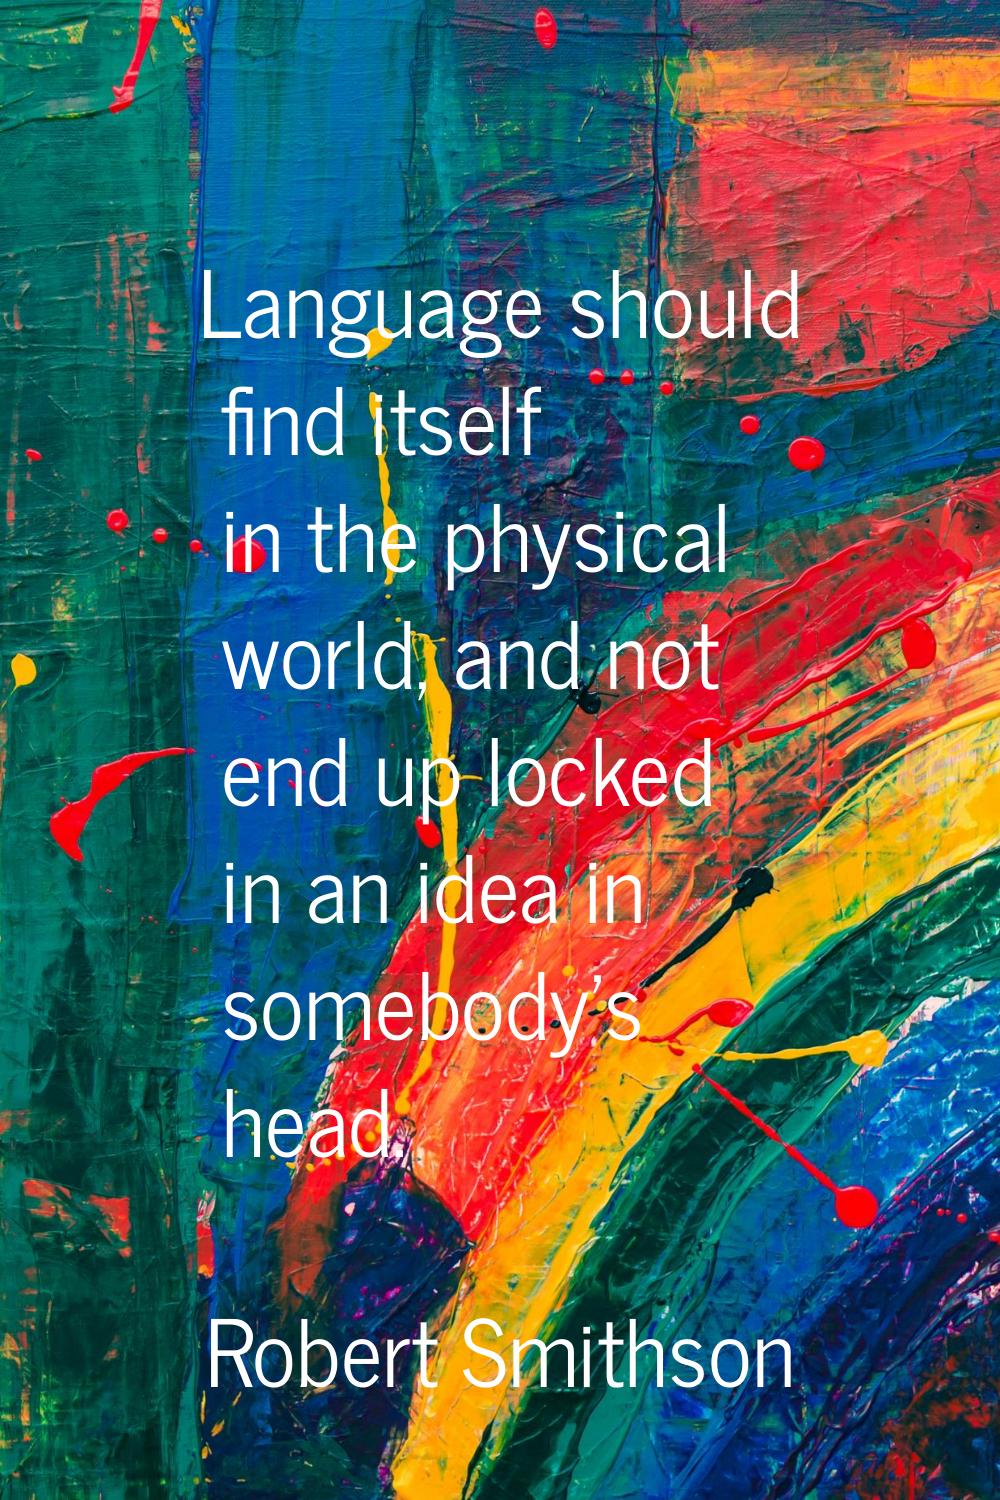 Language should find itself in the physical world, and not end up locked in an idea in somebody's h